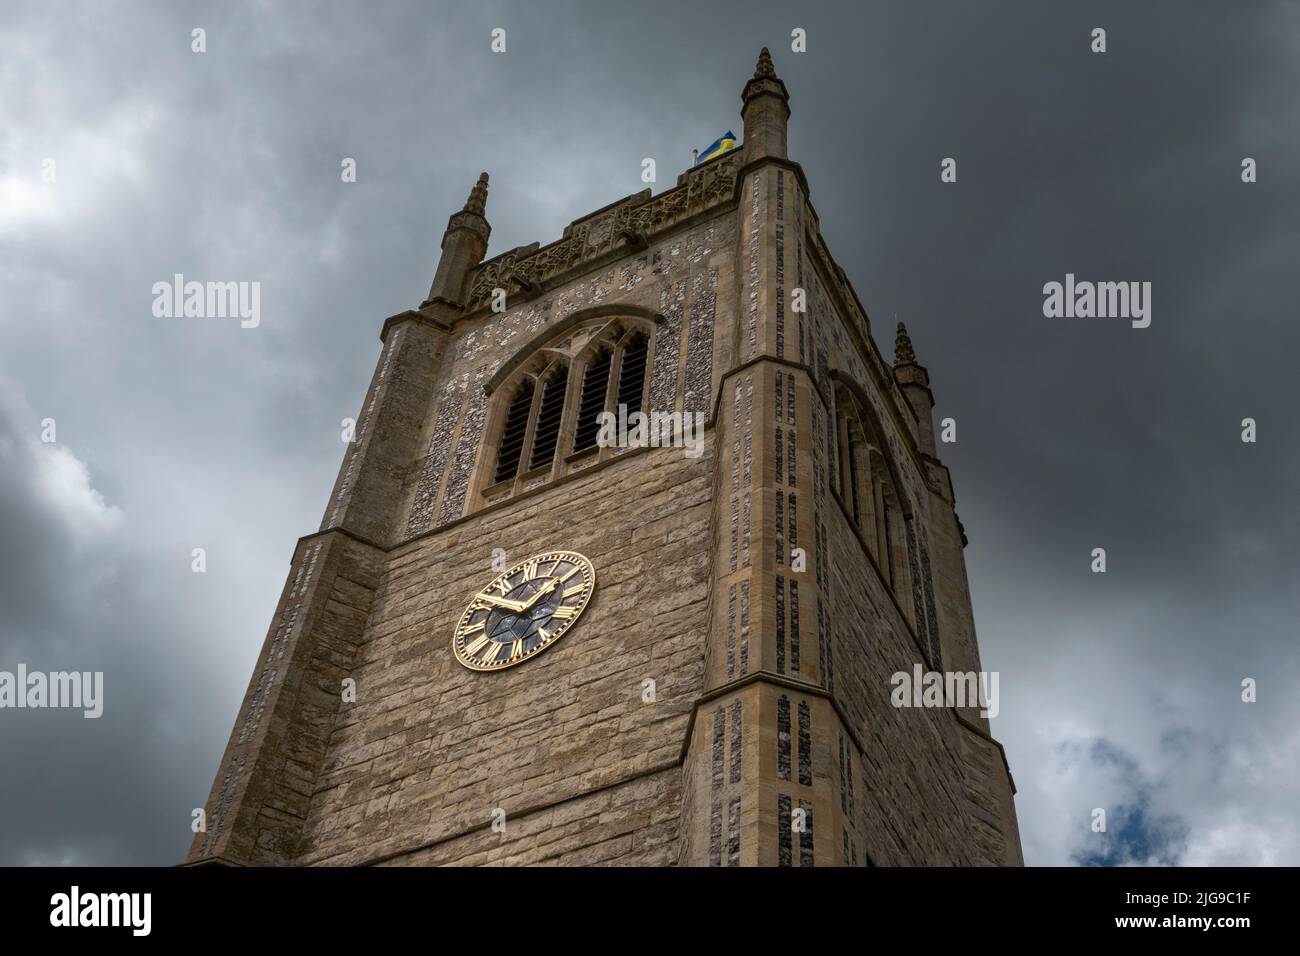 The tower of All Saints Church Laxfield against an angry dark sky with the clock face glinting in the sunlight Stock Photo